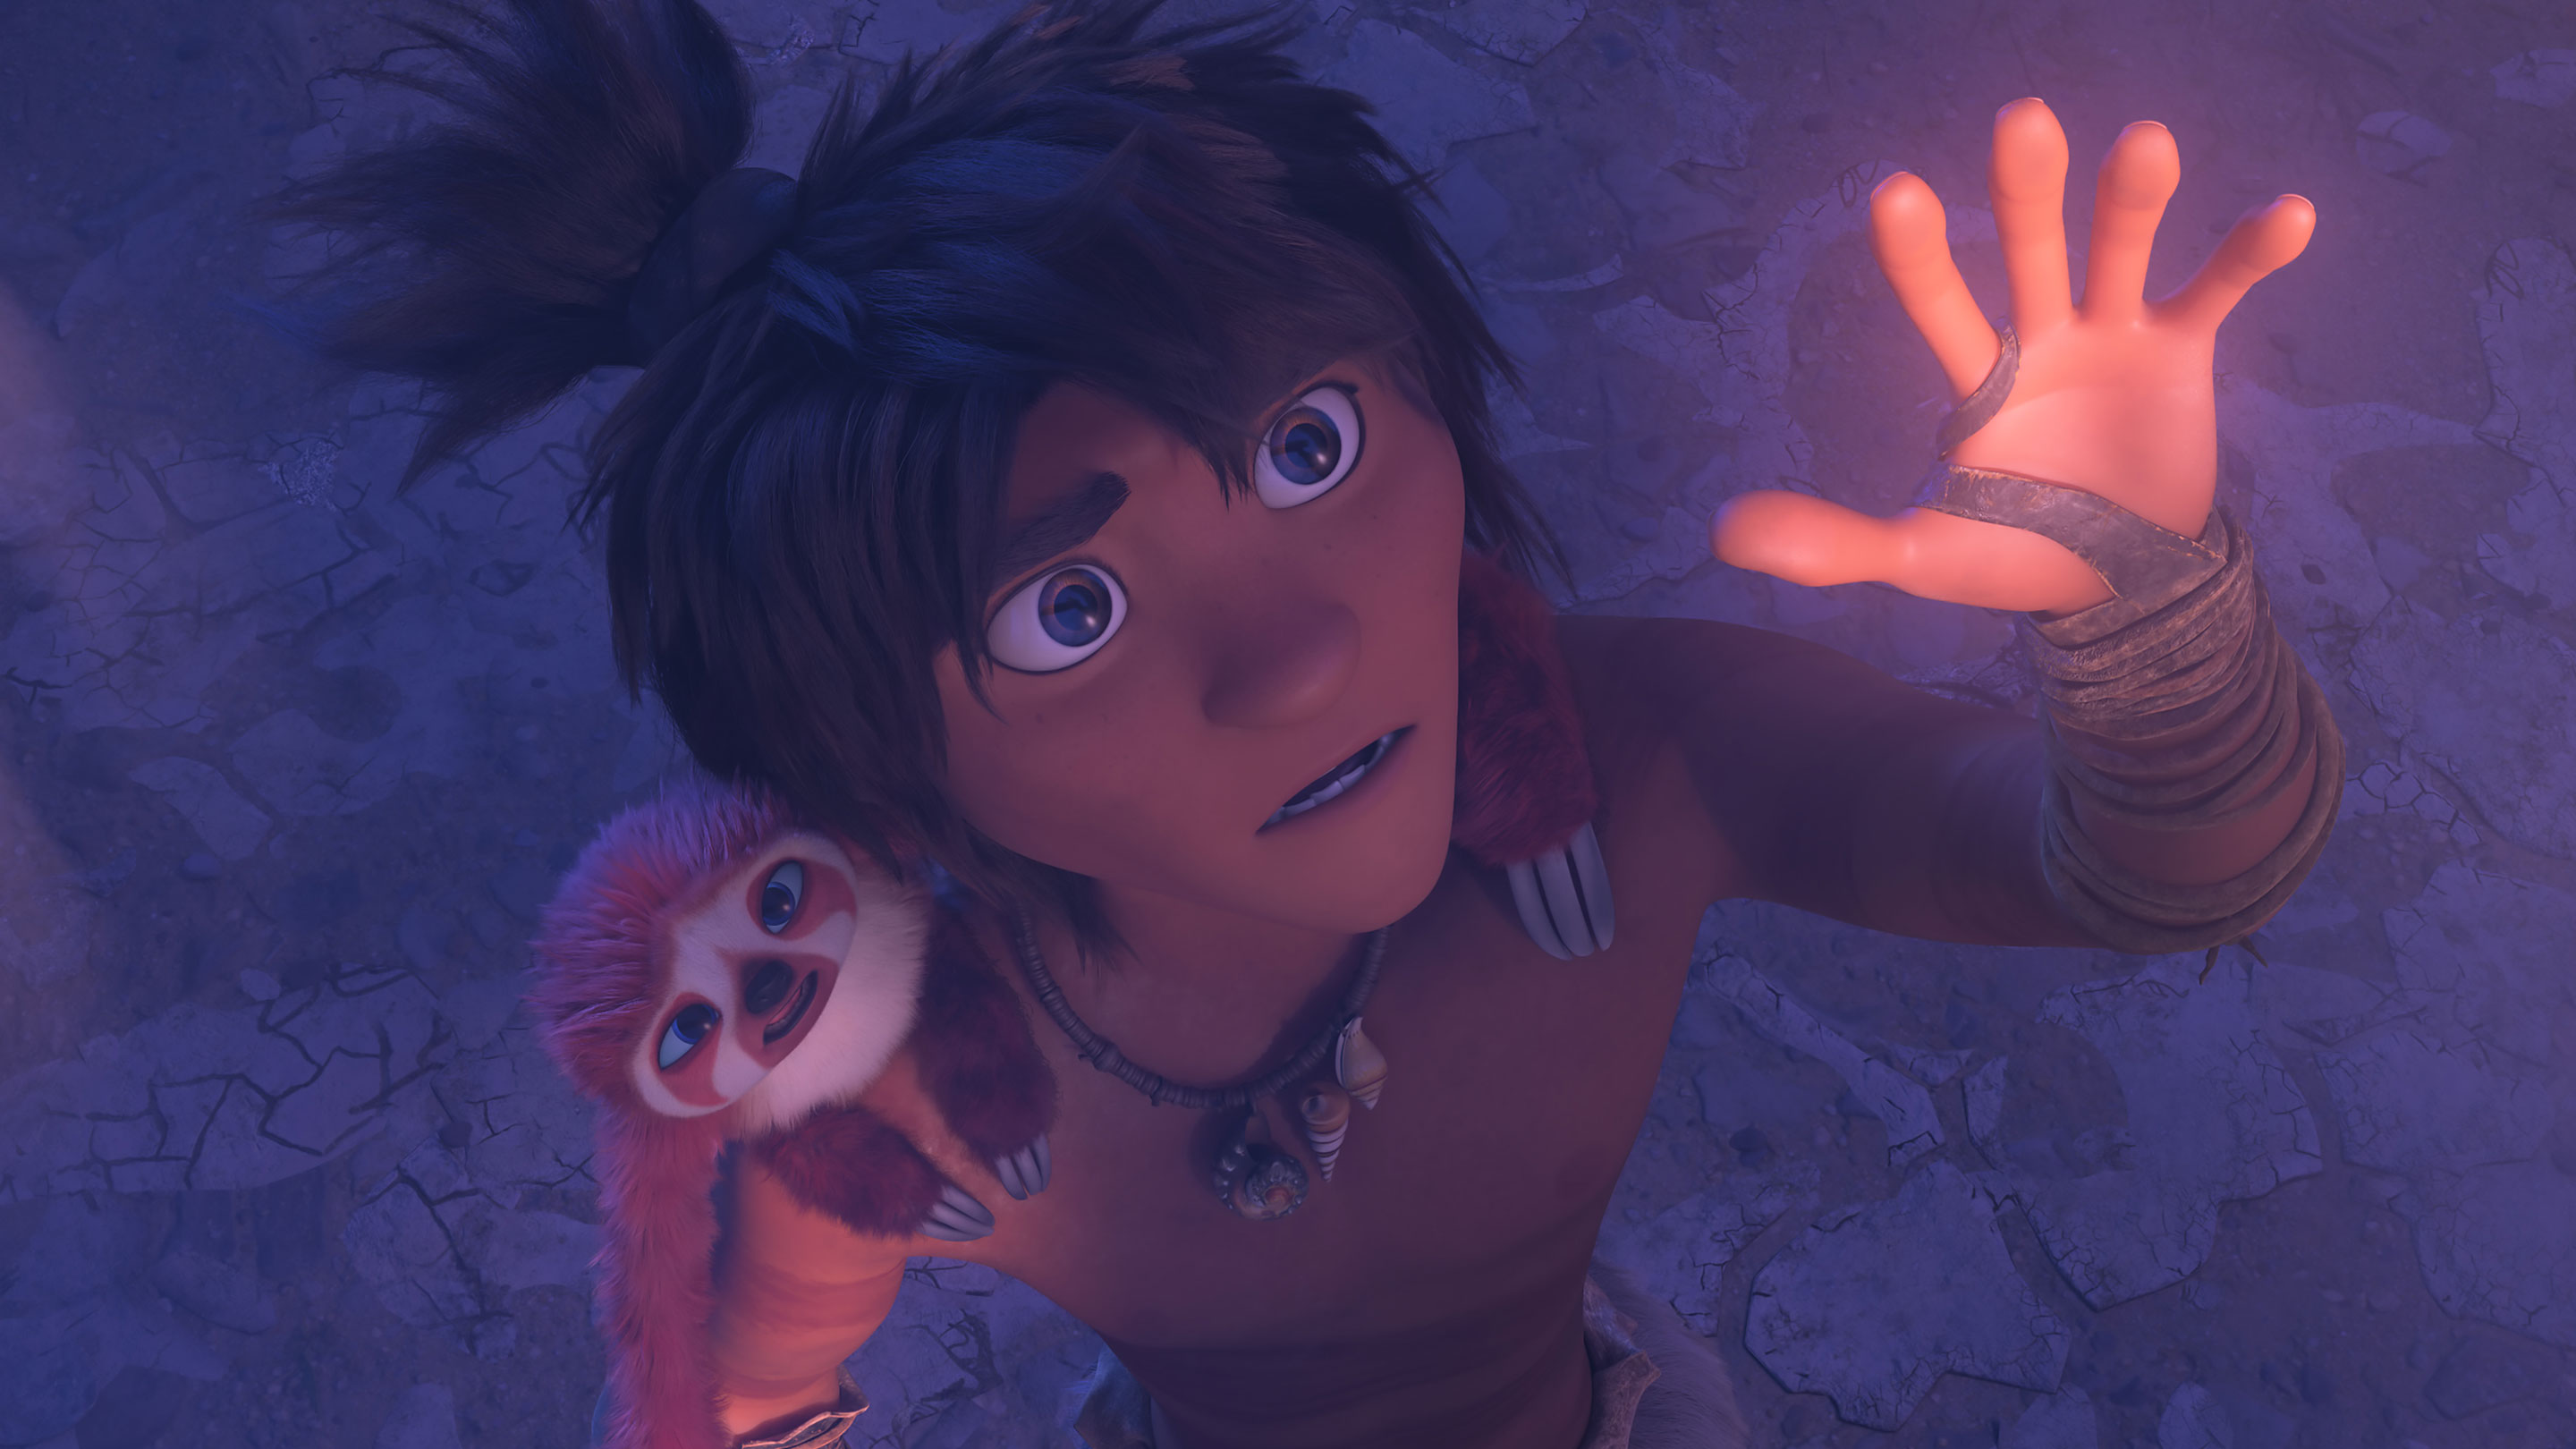 The Croods: A New Age | Movie Site | Available Now on Digital, 2/23 on 4K  Ultra HD, Blu-ray & DVD | DreamWorks